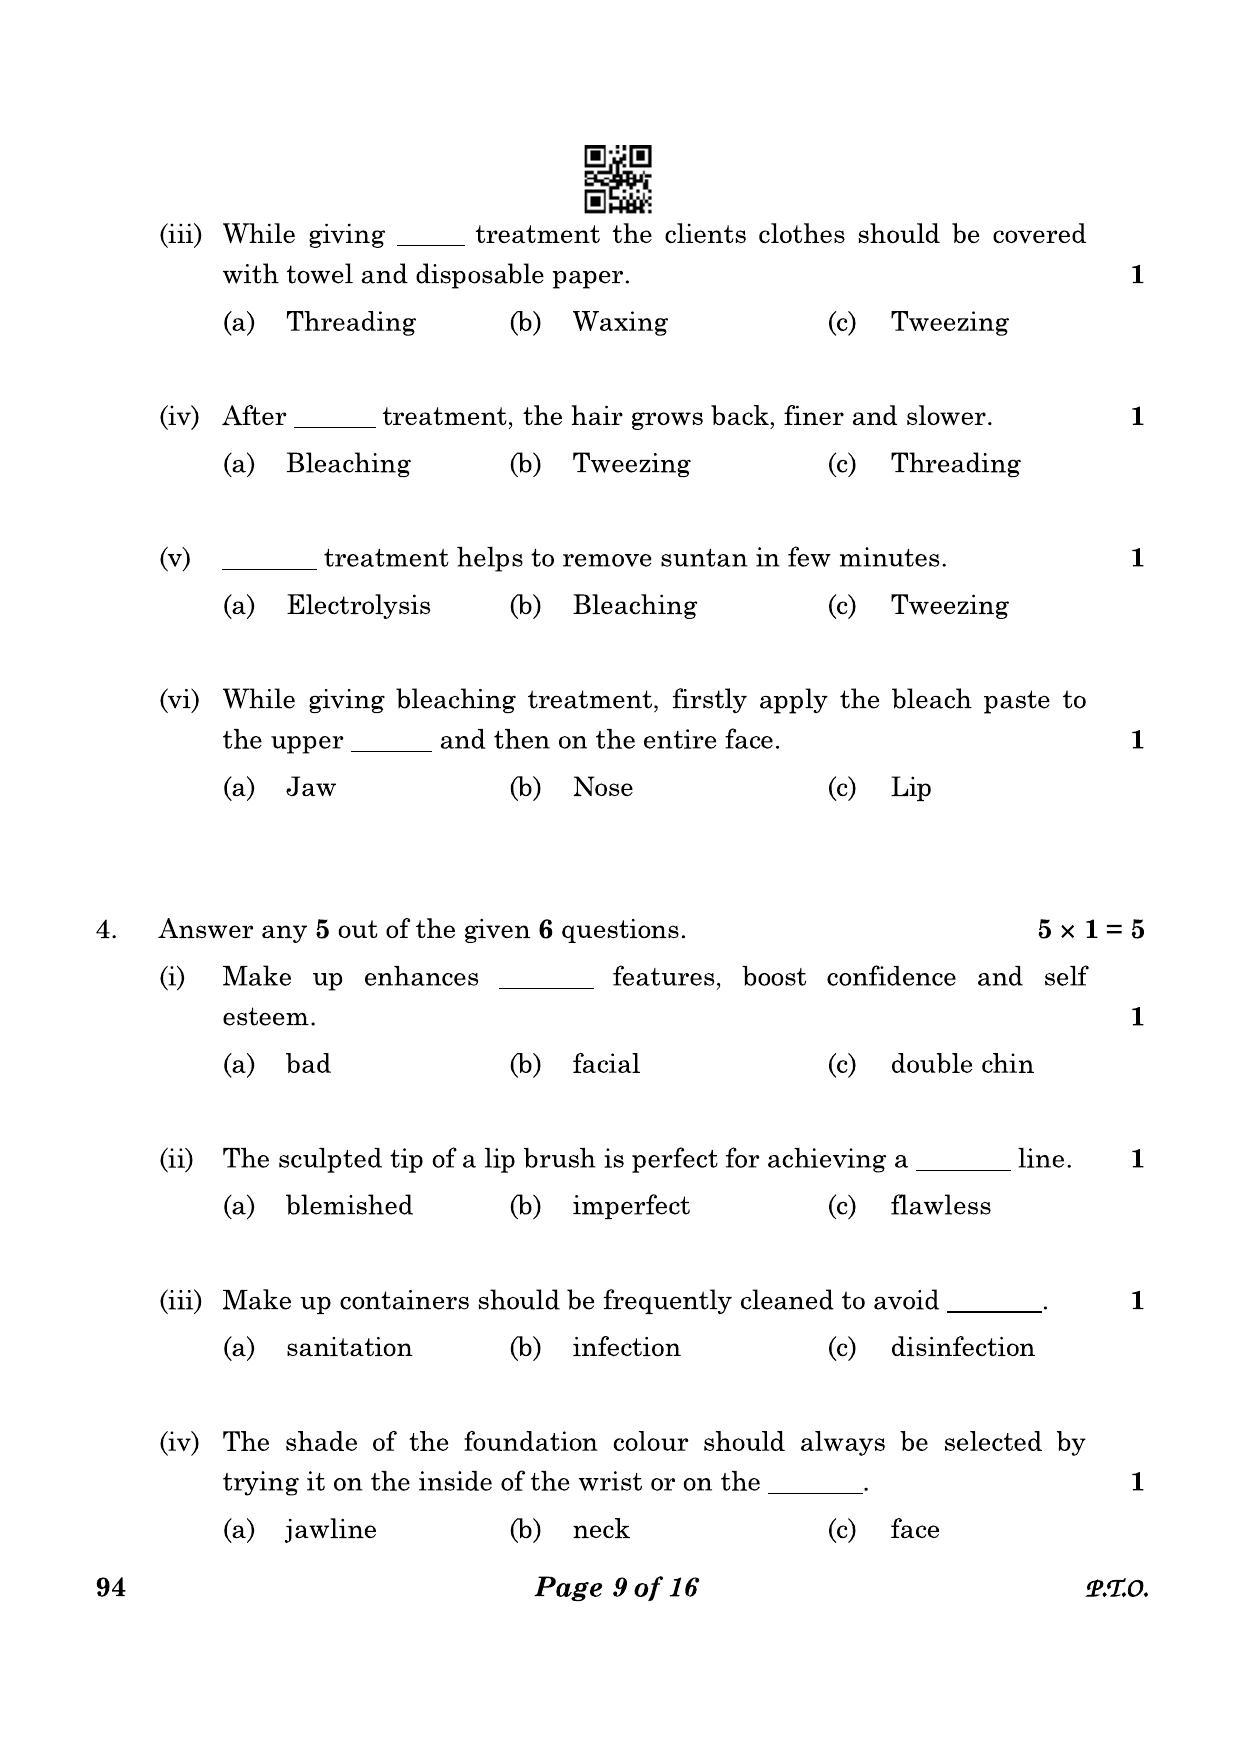 CBSE Class 10 94 Beauty And Wellness 2023 Question Paper - Page 9